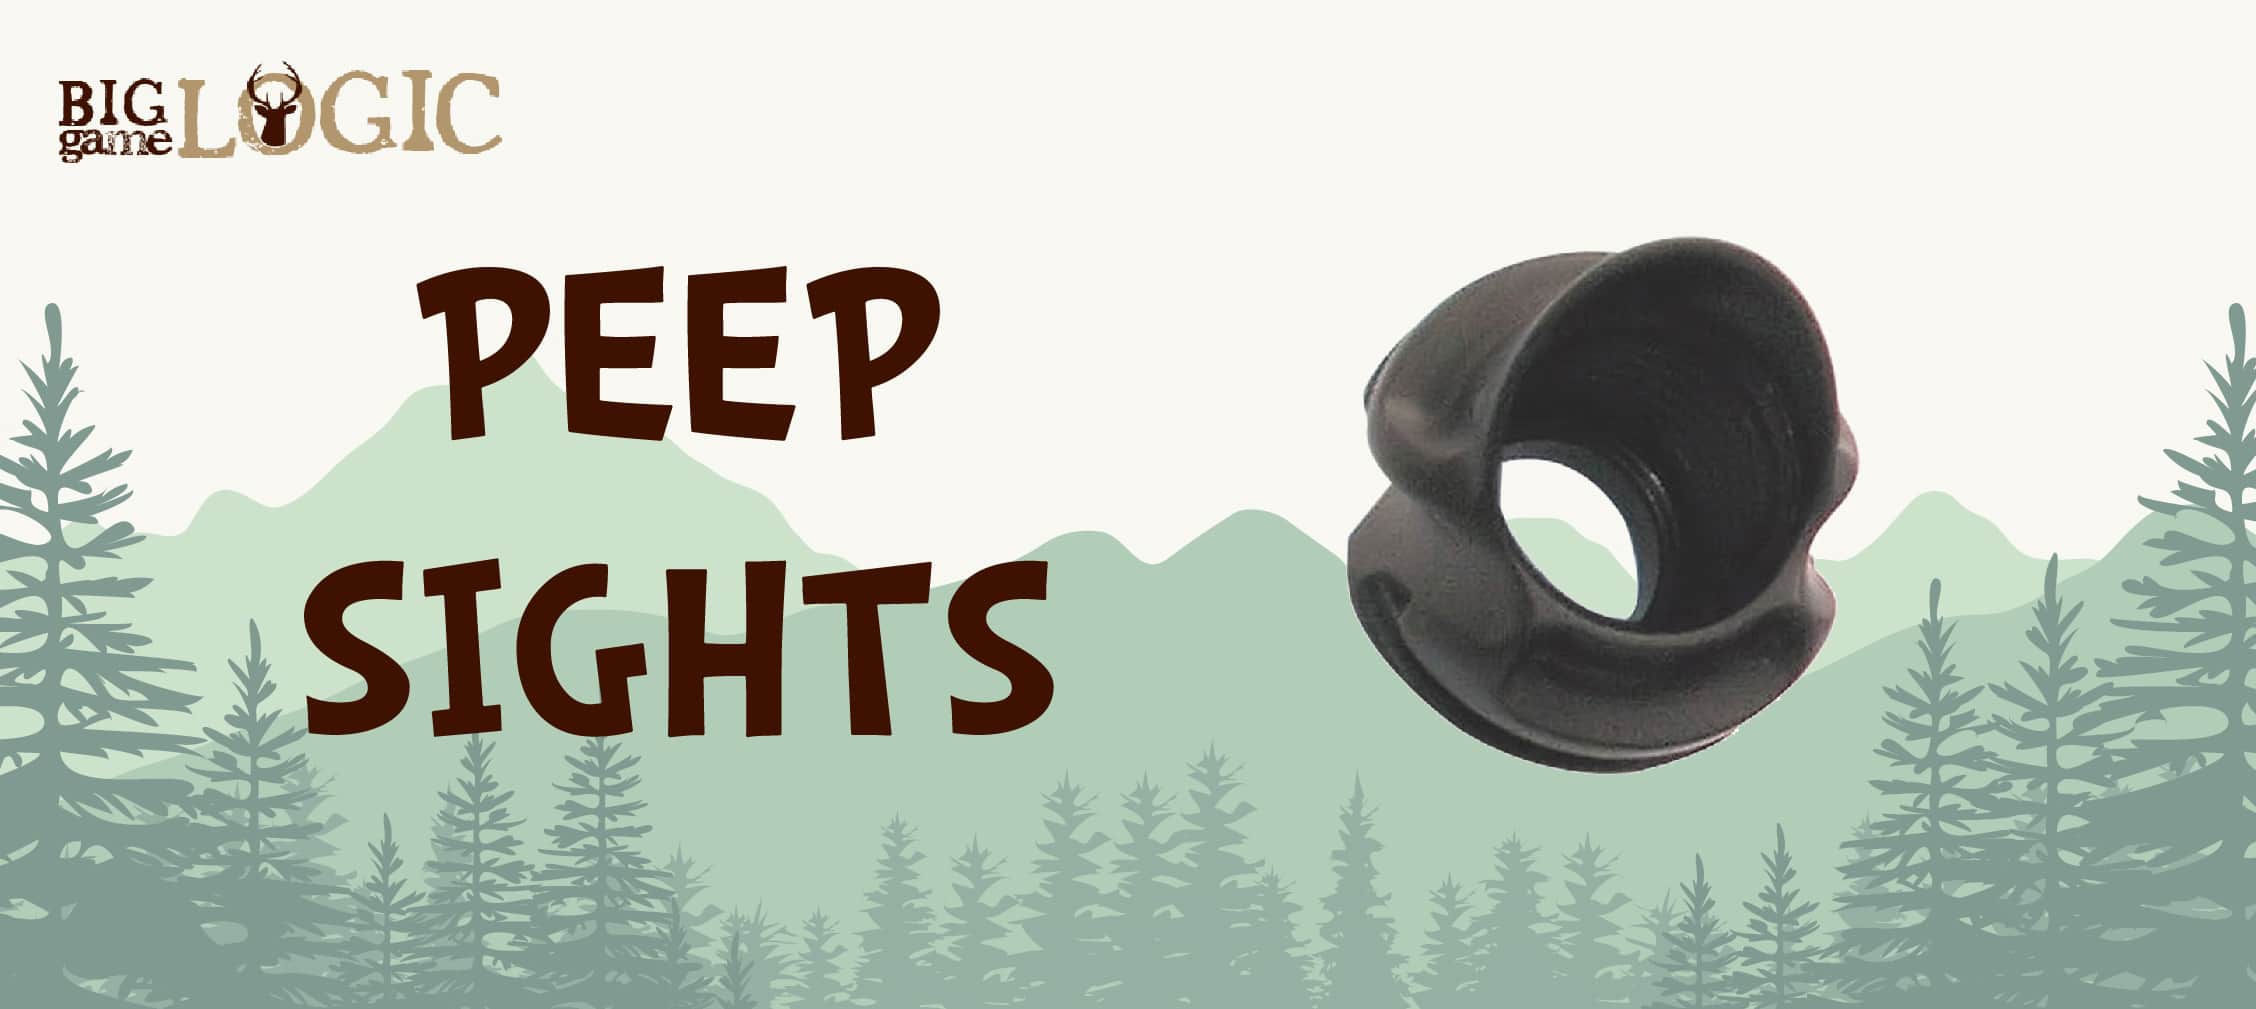 Best Bow Peep Sights Buyers Guide Review